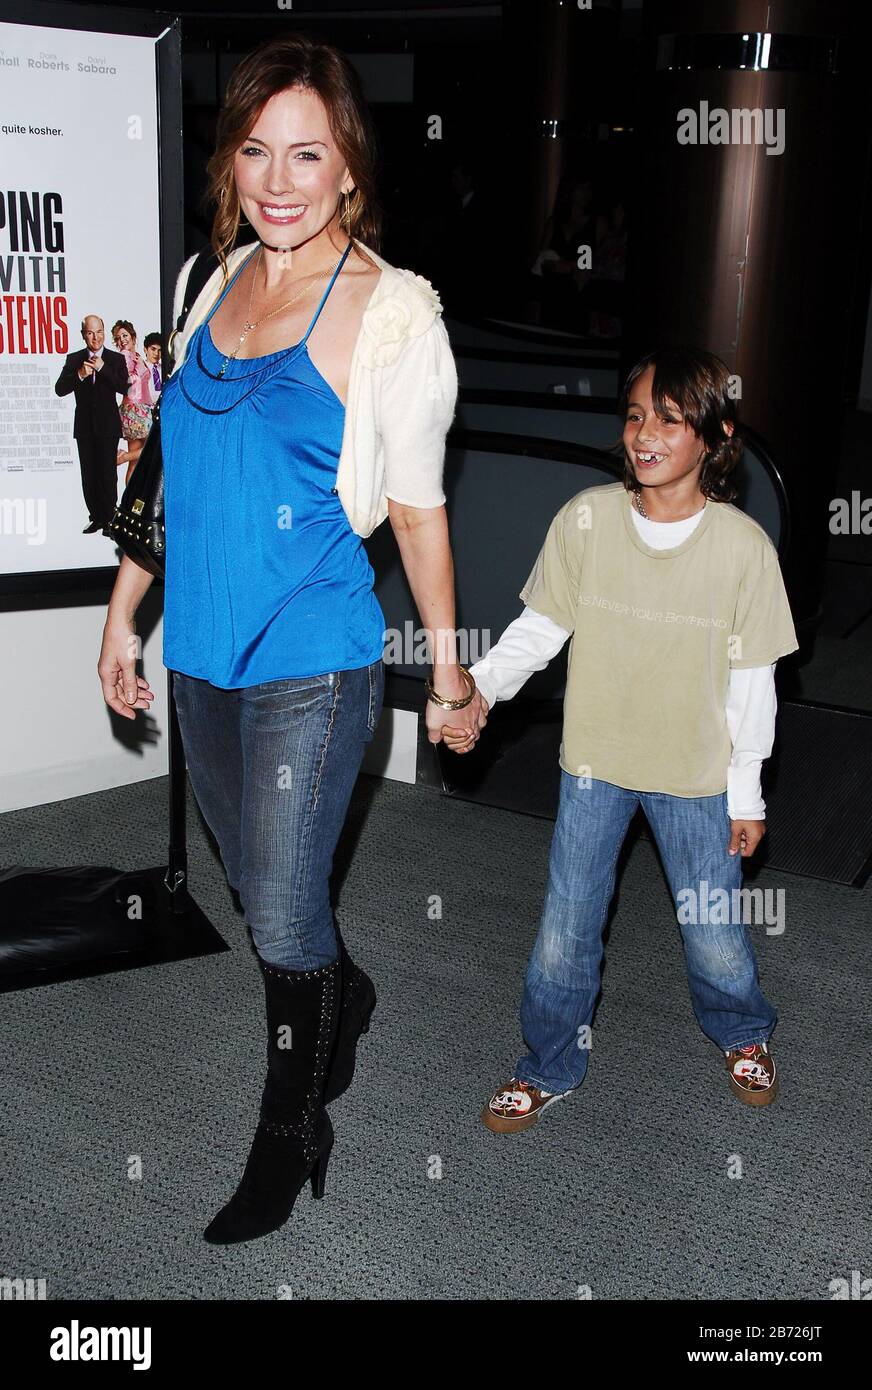 Krista Allen and Son Jake at the Los Angeles Premiere of 'Keeping Up With The Steins' held at the Pacific Design Center in West Hollywood, CA. The event took place on Monday, May 8, 2006.  Photo by: SBM / PictureLux - All Rights Reserved - File Reference # 33984-3130SBMPLX Stock Photo